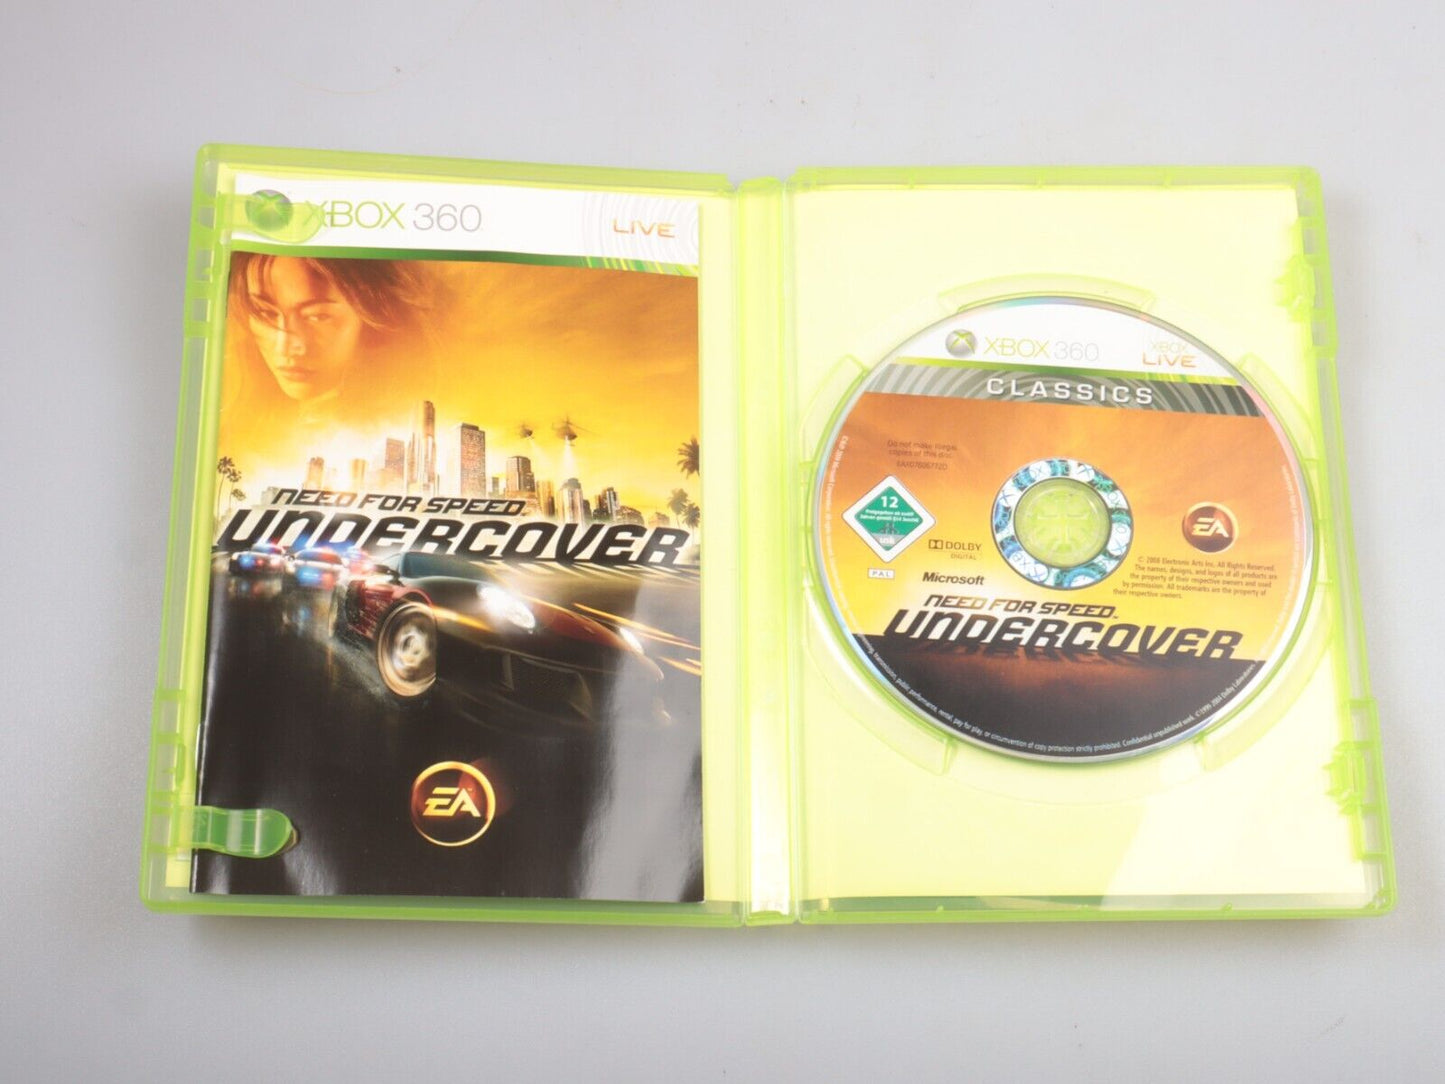 Xbox 360 | Need For Speed Undercover